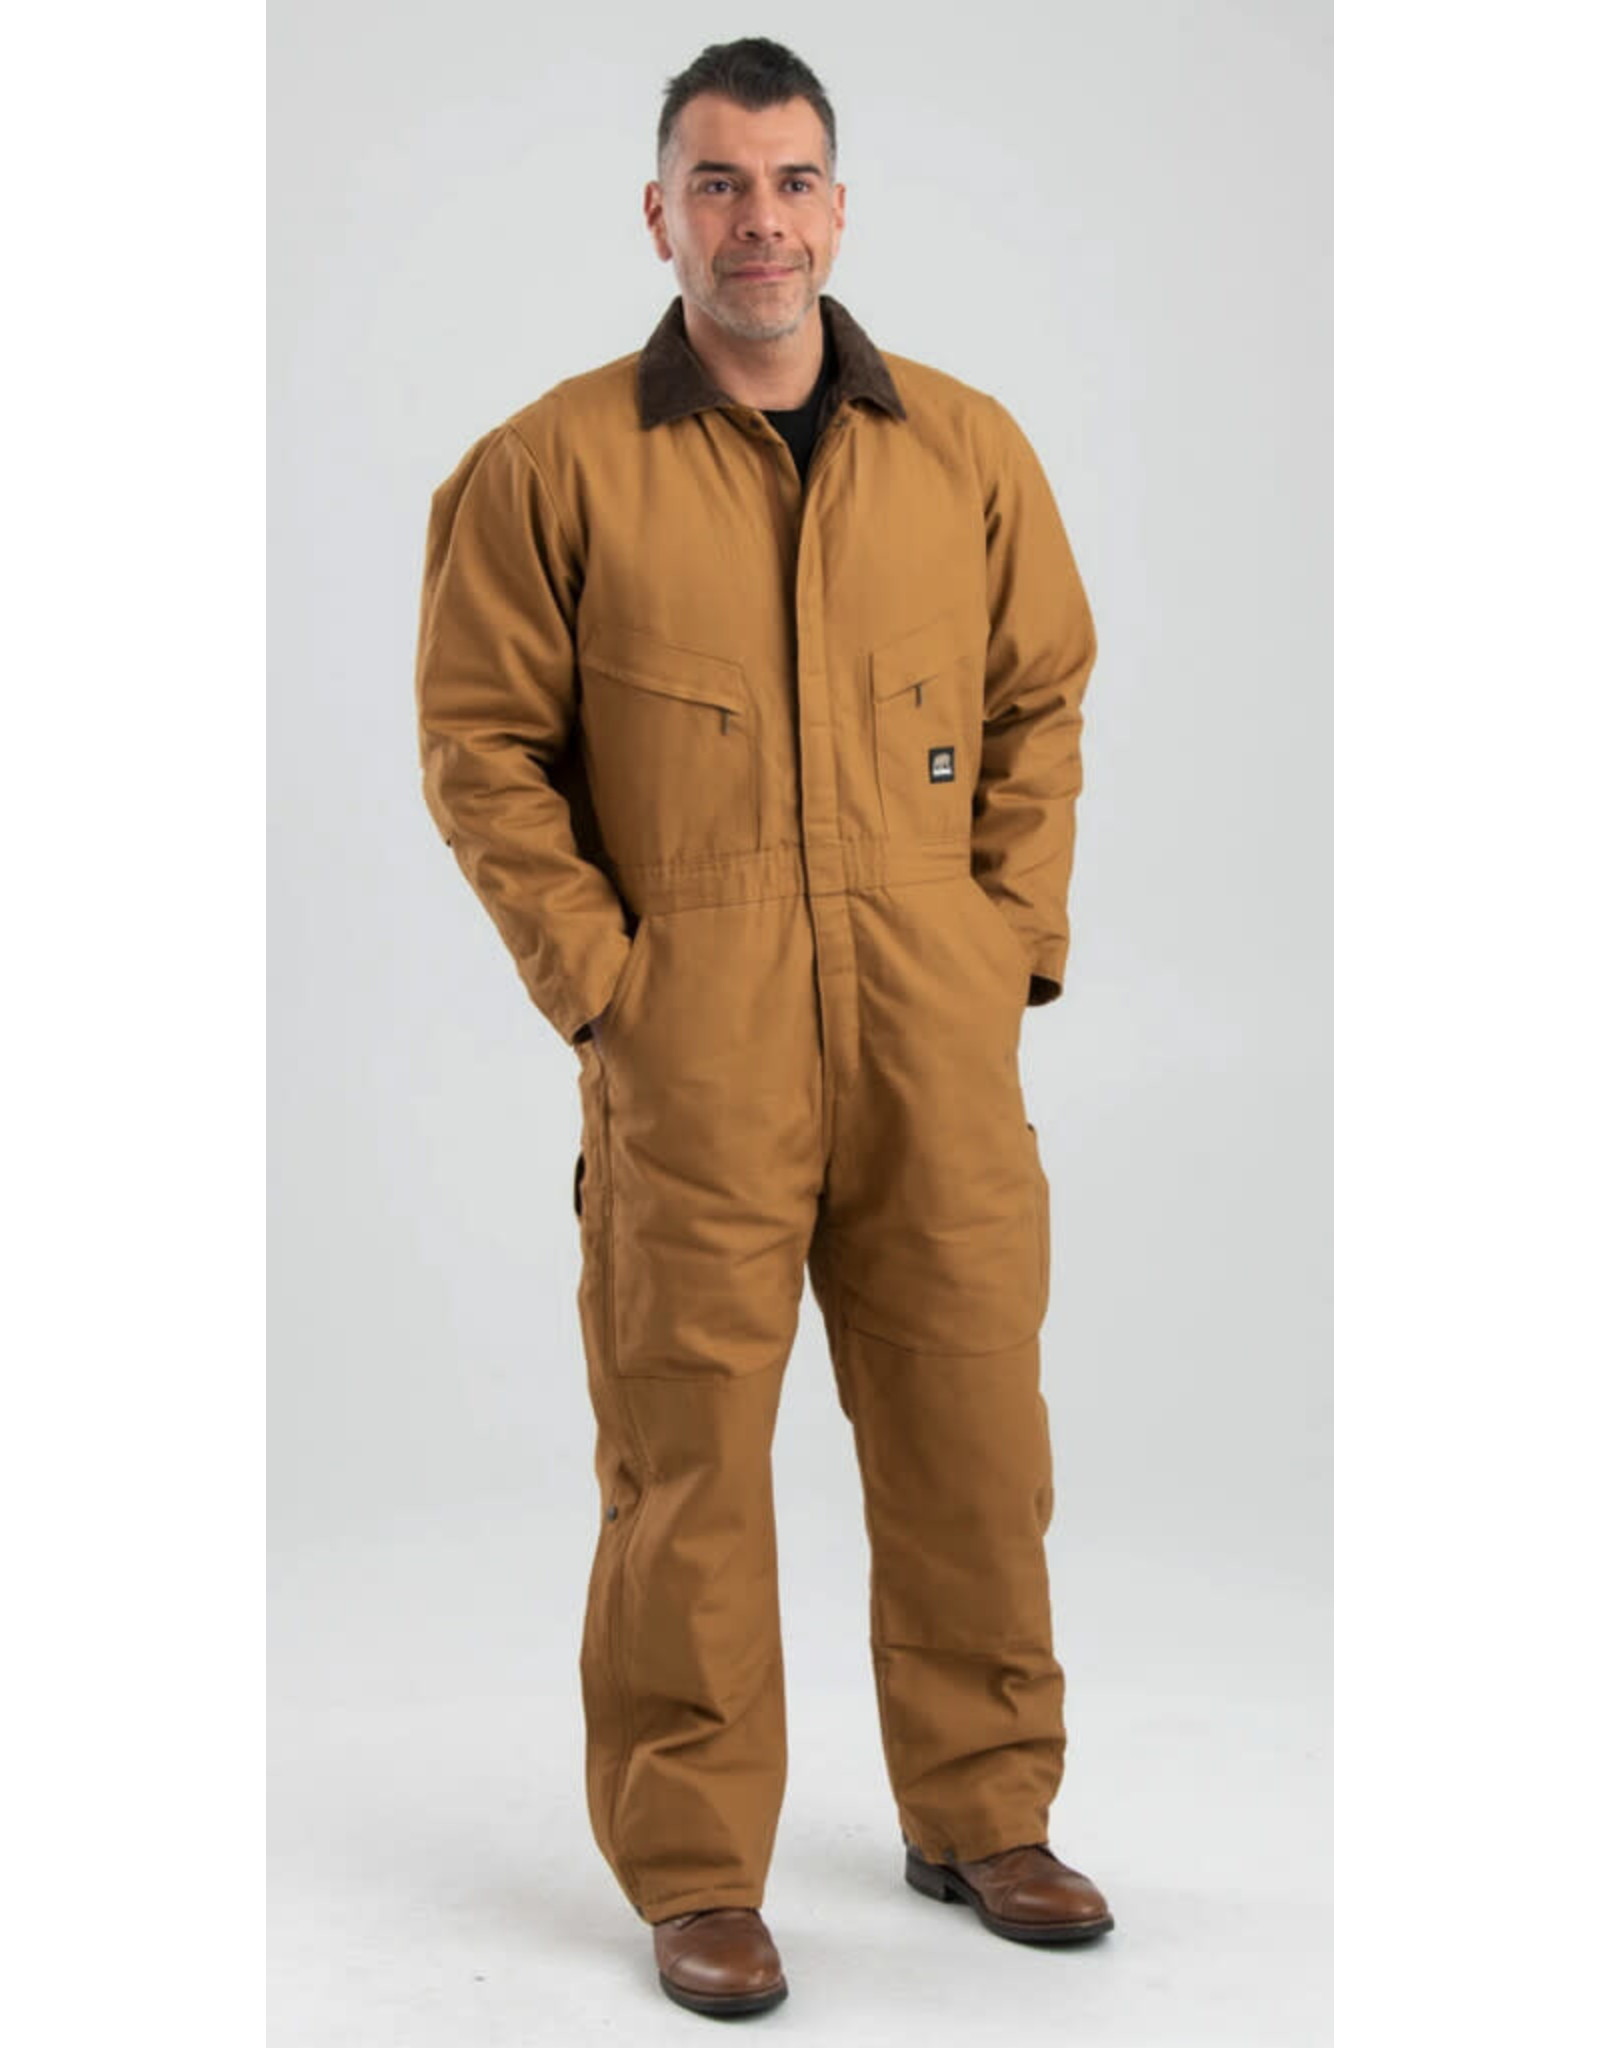 Berne Mens Insulated Coveralls I417BD Sz. Large